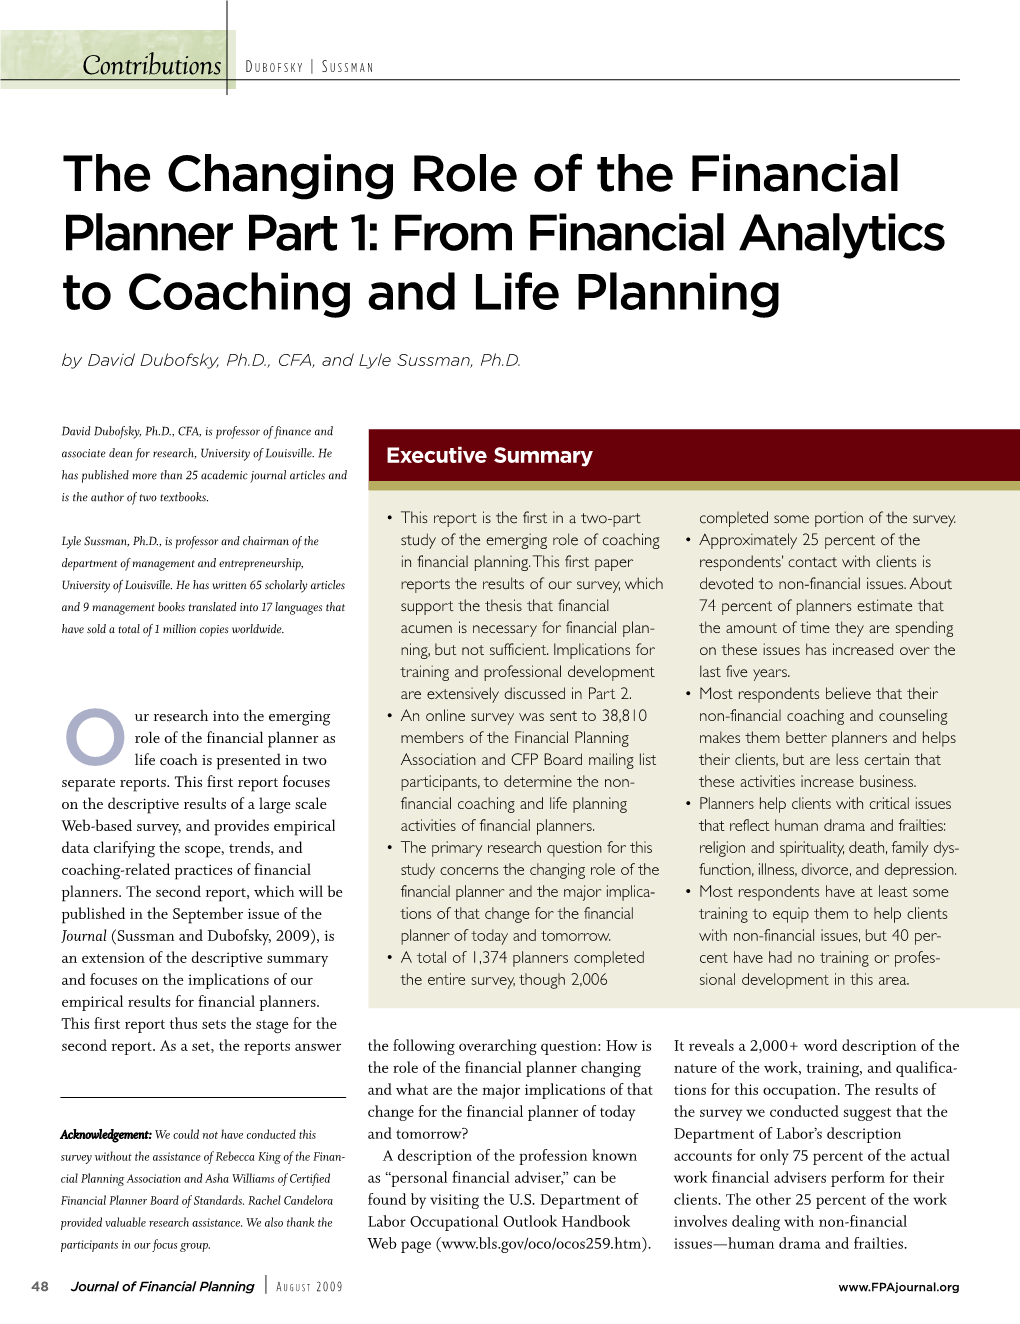 The Changing Role of the Financial Planner Part 1: from Financial Analytics to Coaching and Life Planning